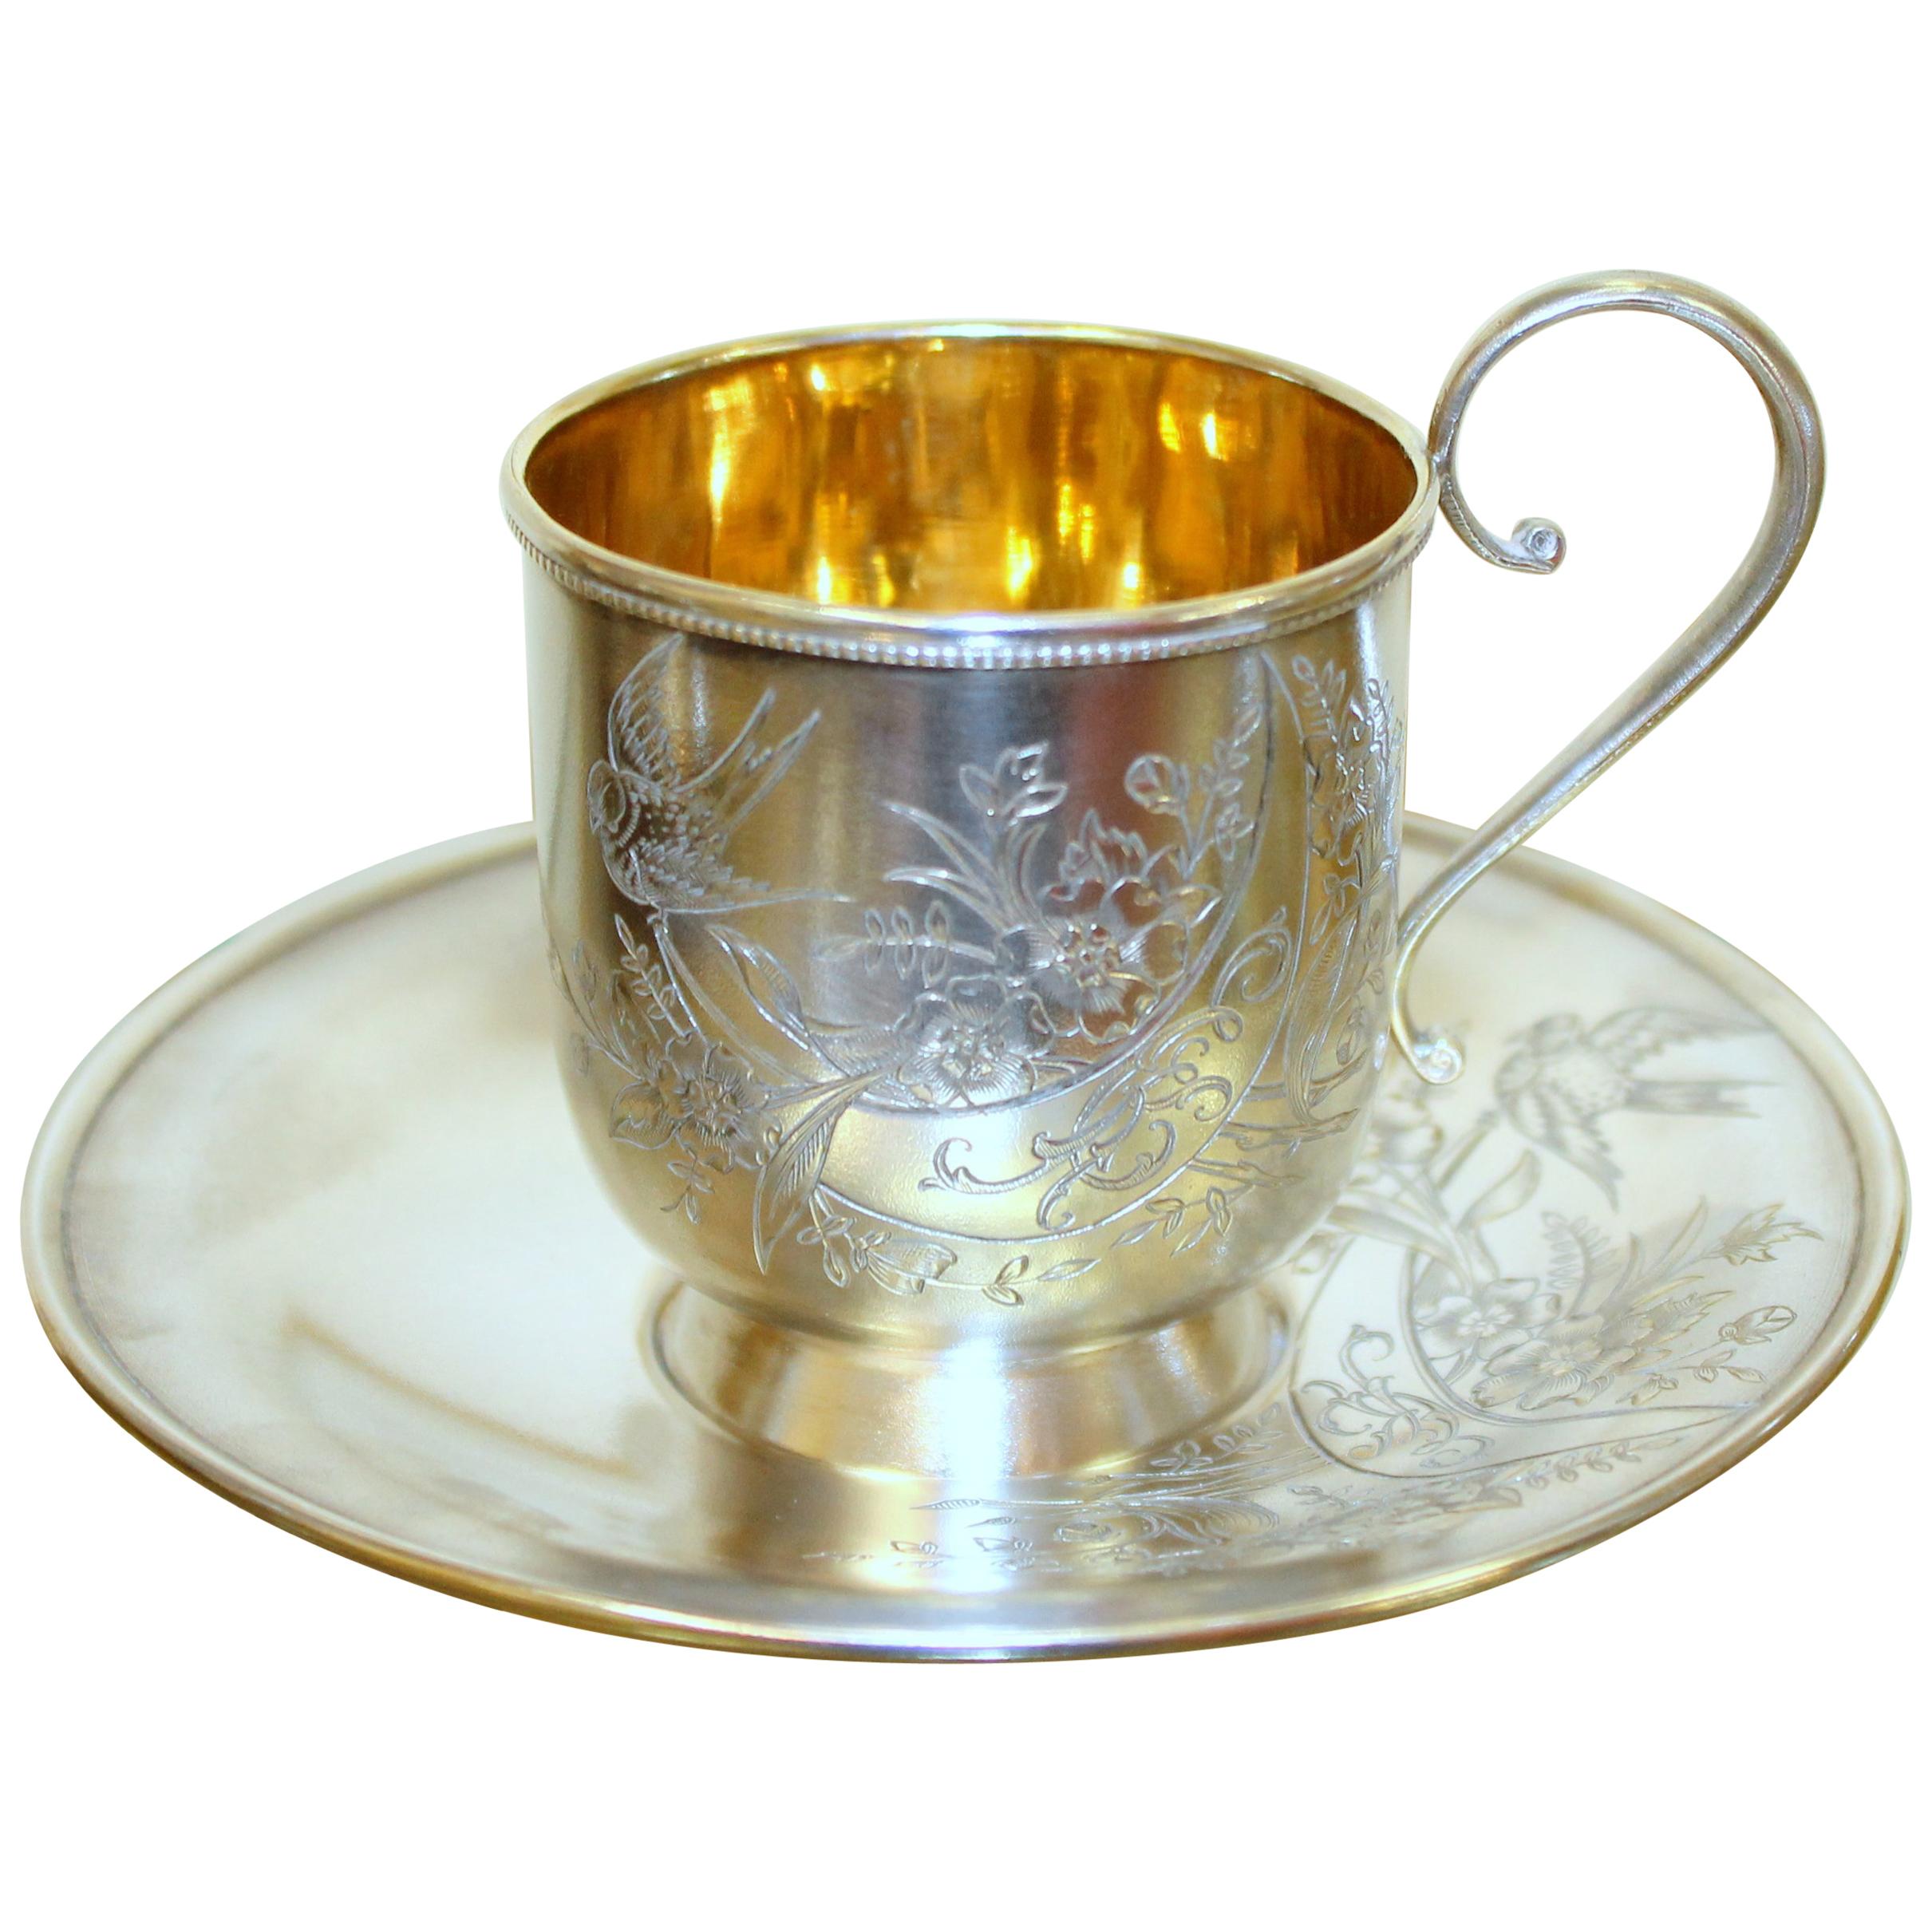 Antique Russian .875 Silver Hand Engraved Cup and Saucer, Baladanova, Moscow